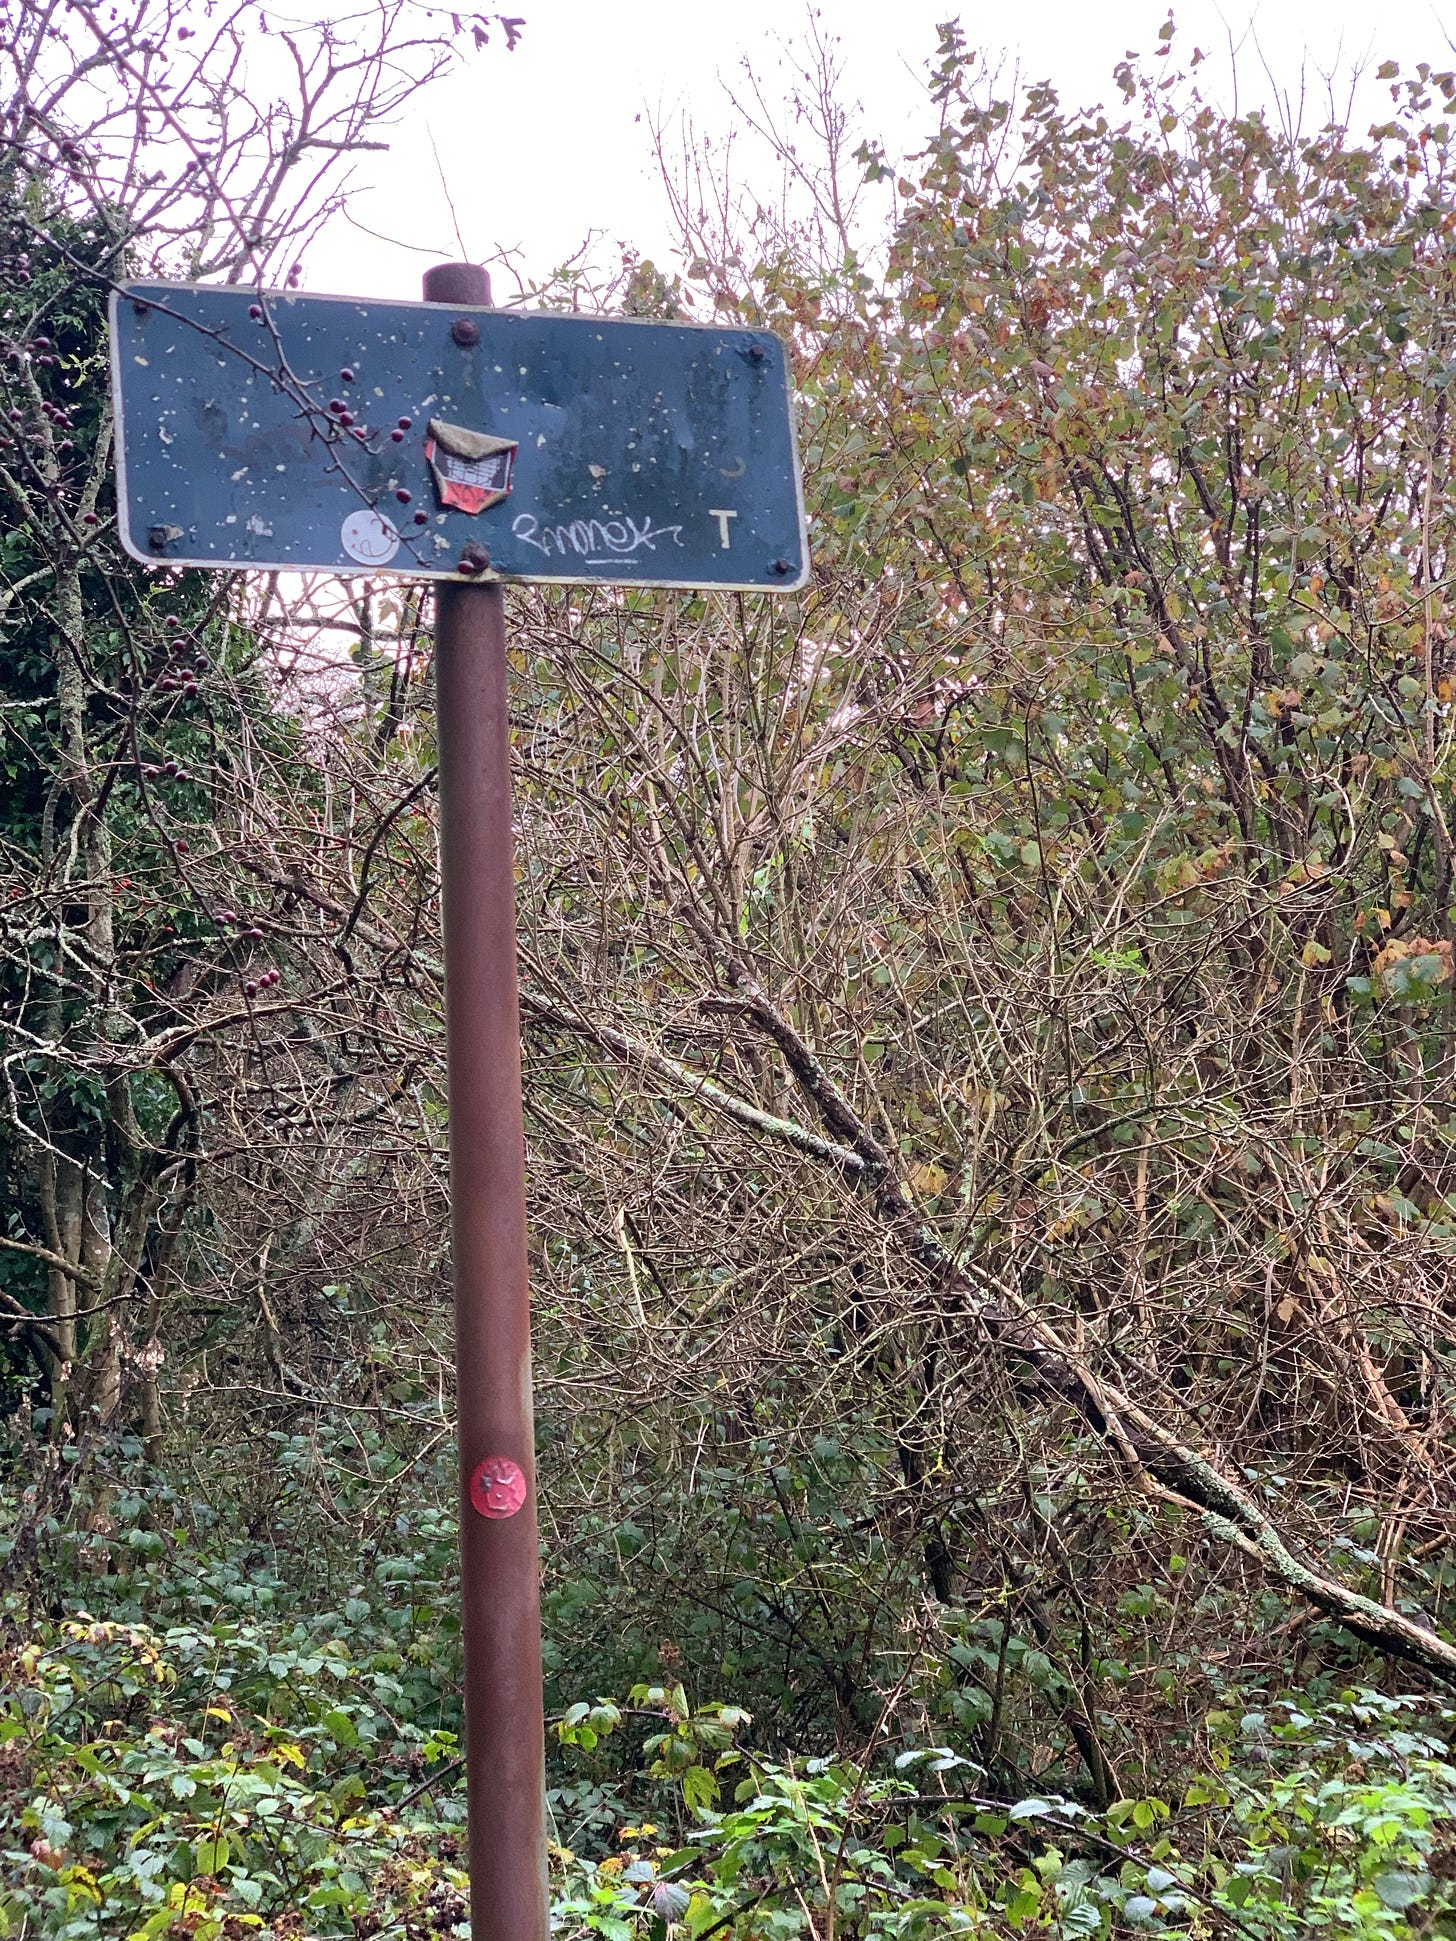 A photo of a dark green sign on a rusty pole in front of some wintry bushes. The writng on the sign has rubbed away and been replaced with stickers and graffiti.